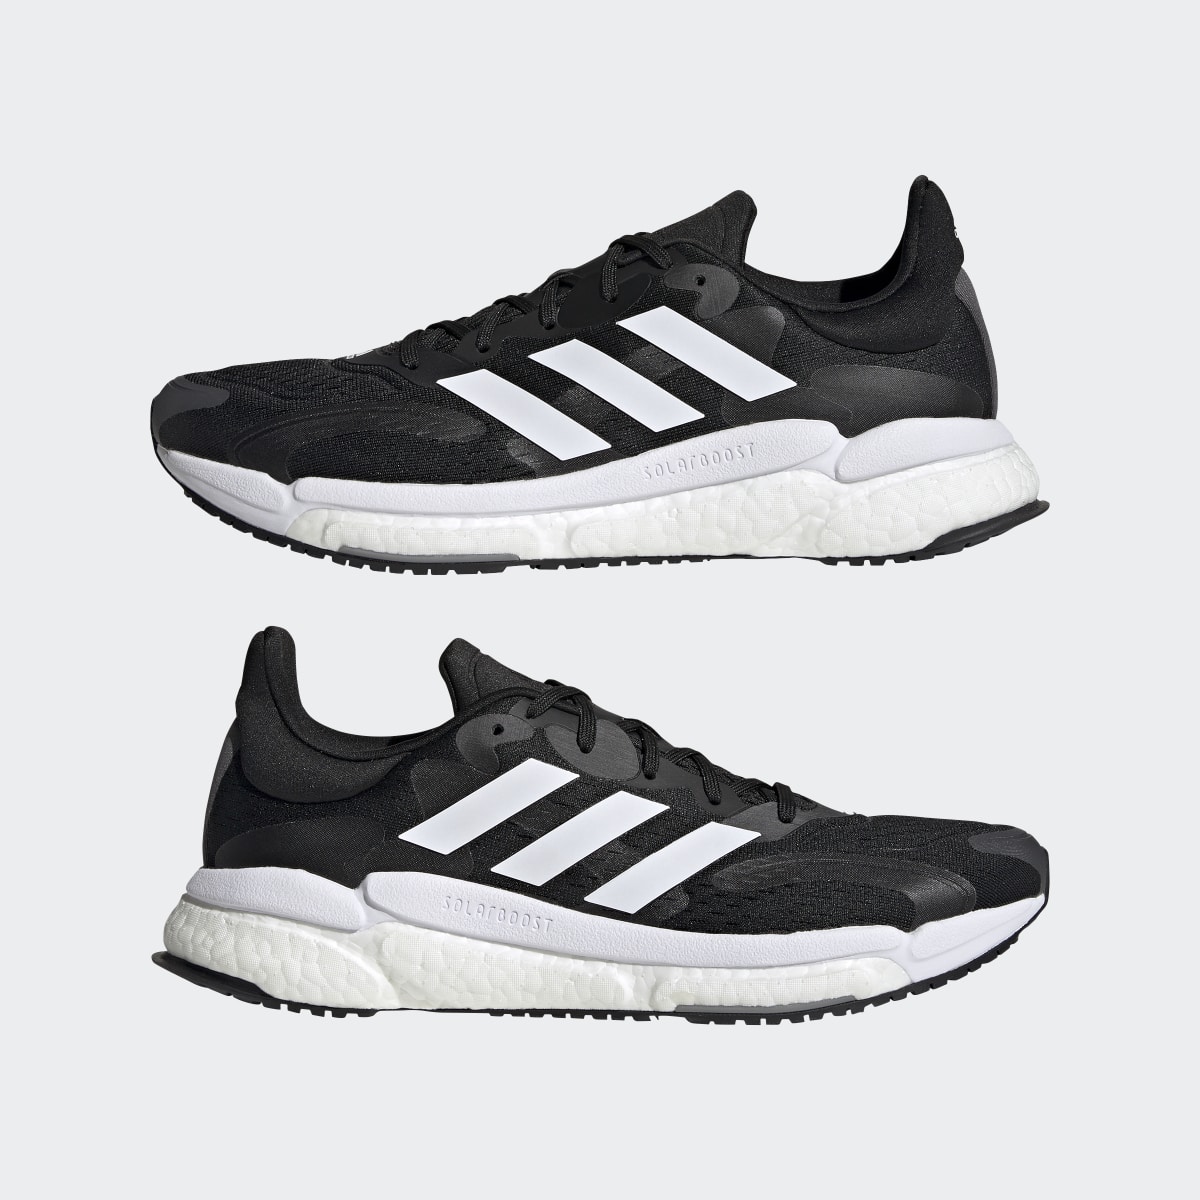 Adidas Solarboost 4 Shoes. 11